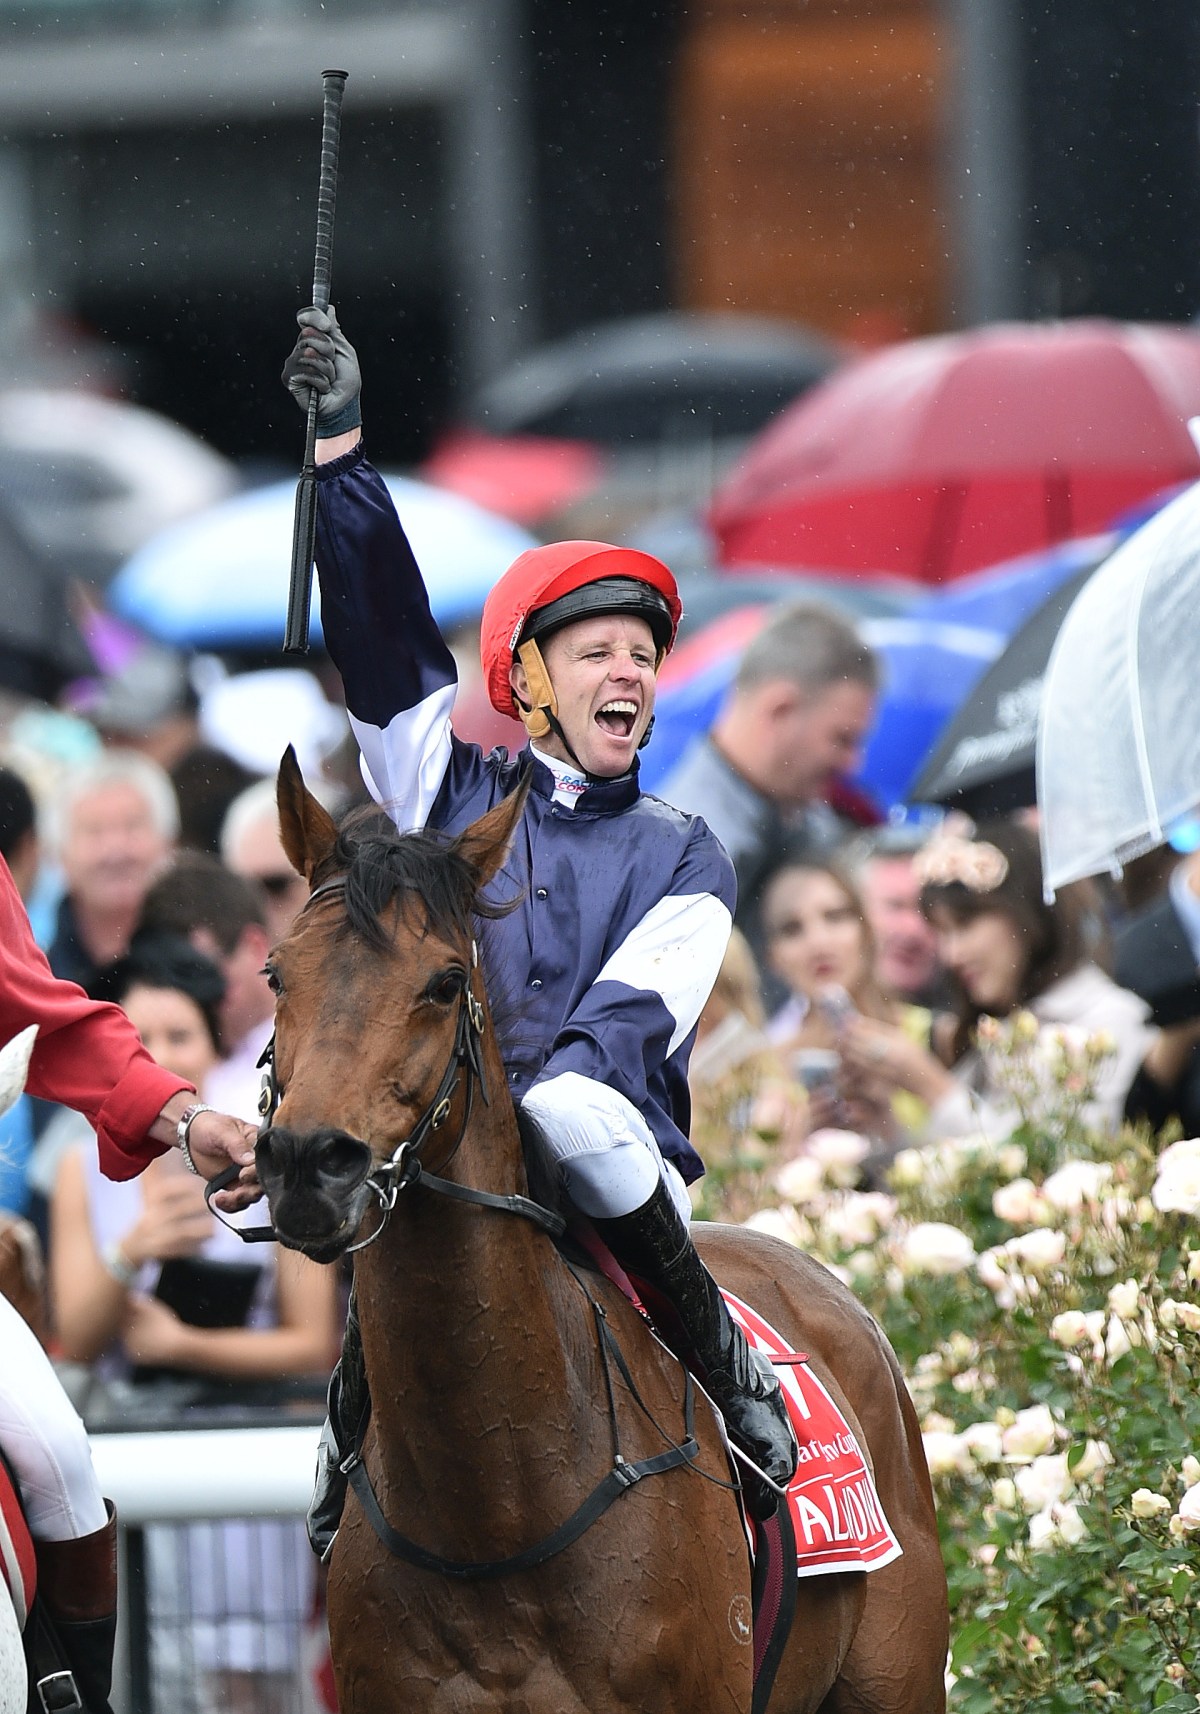 Kerrin McEvoy reacts after riding Almandin to victory in the Melbourne Cup at Flemington Racecourse in Melbourne, Tuesday. Nov. 1, 2016. (AAP Image/Julian Smith) NO ARCHIVING, EDITORIAL USE ONLY